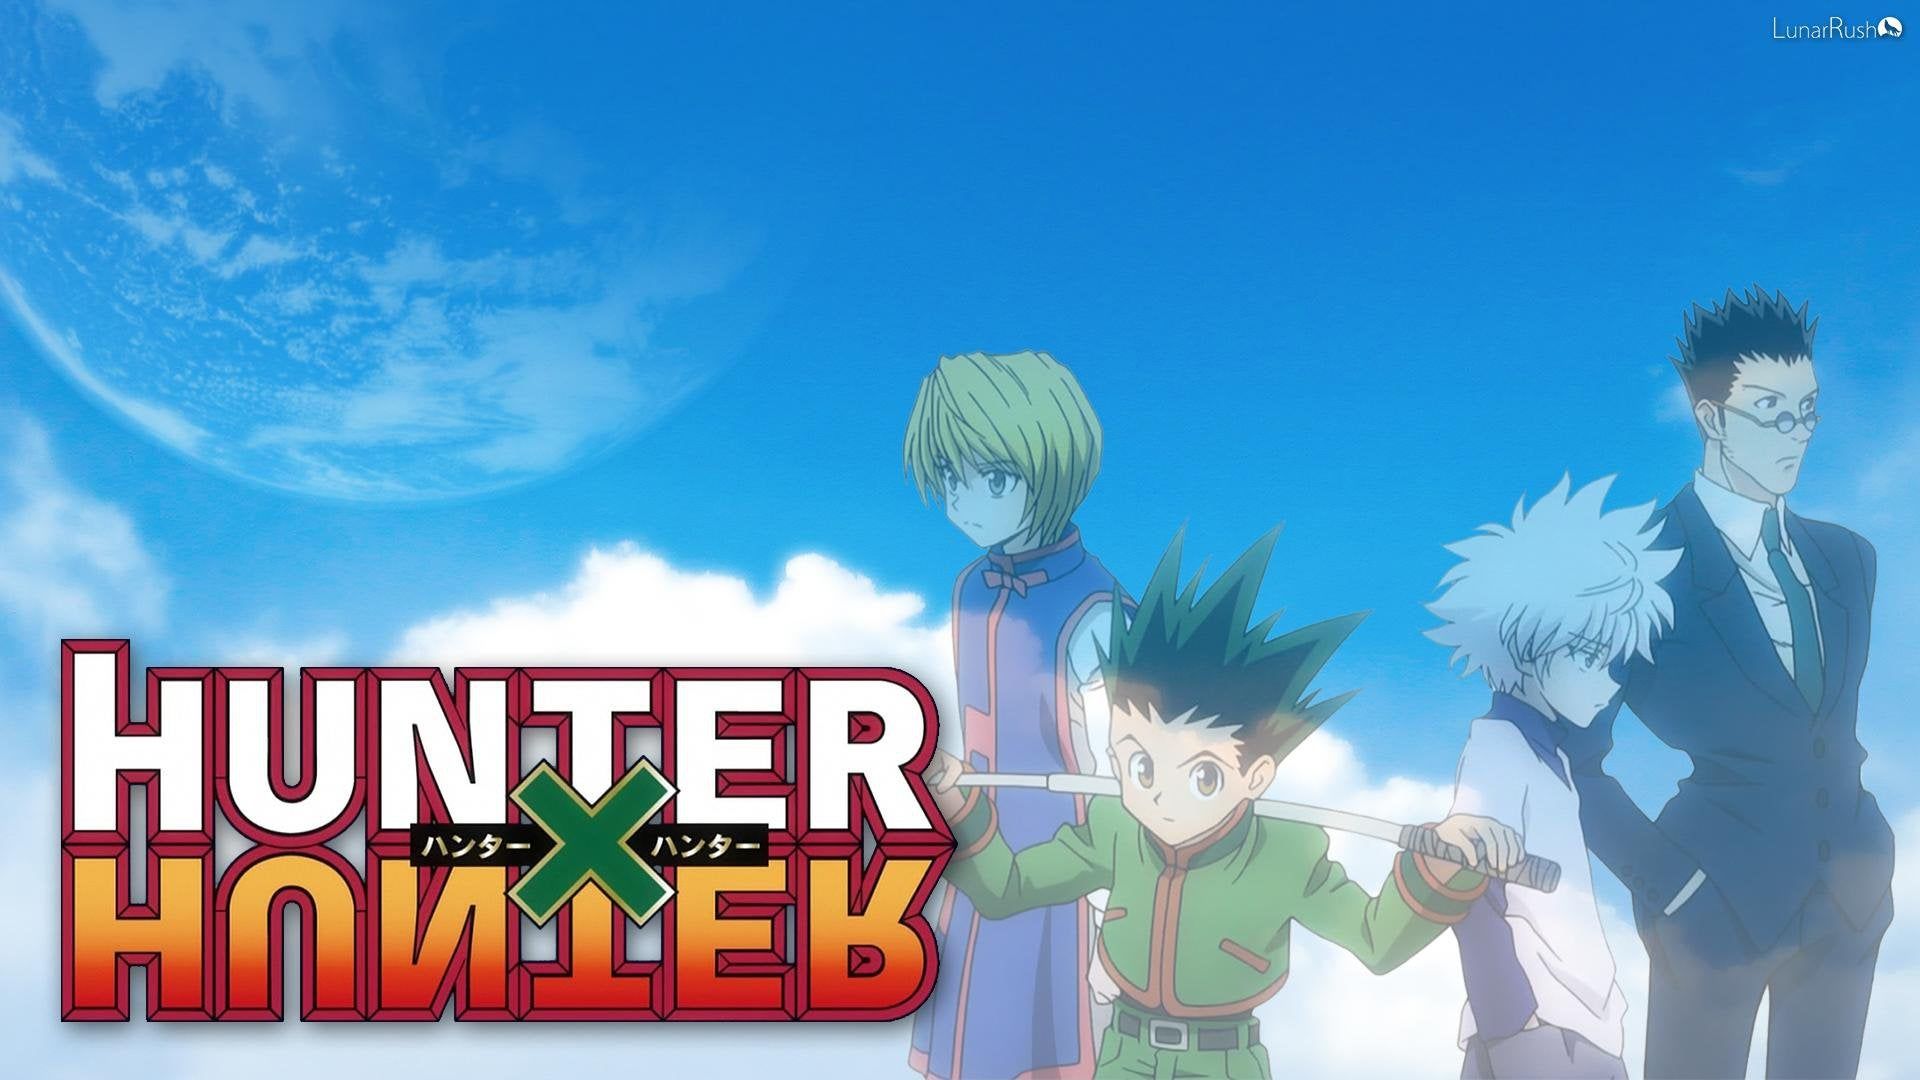 1920x1080 Made Myself A Simplistic Wallpaper From 2011 Anime Thought I Might Share It Let Me Know Any Thoughts On It 1920x1080 Hunterxhunter